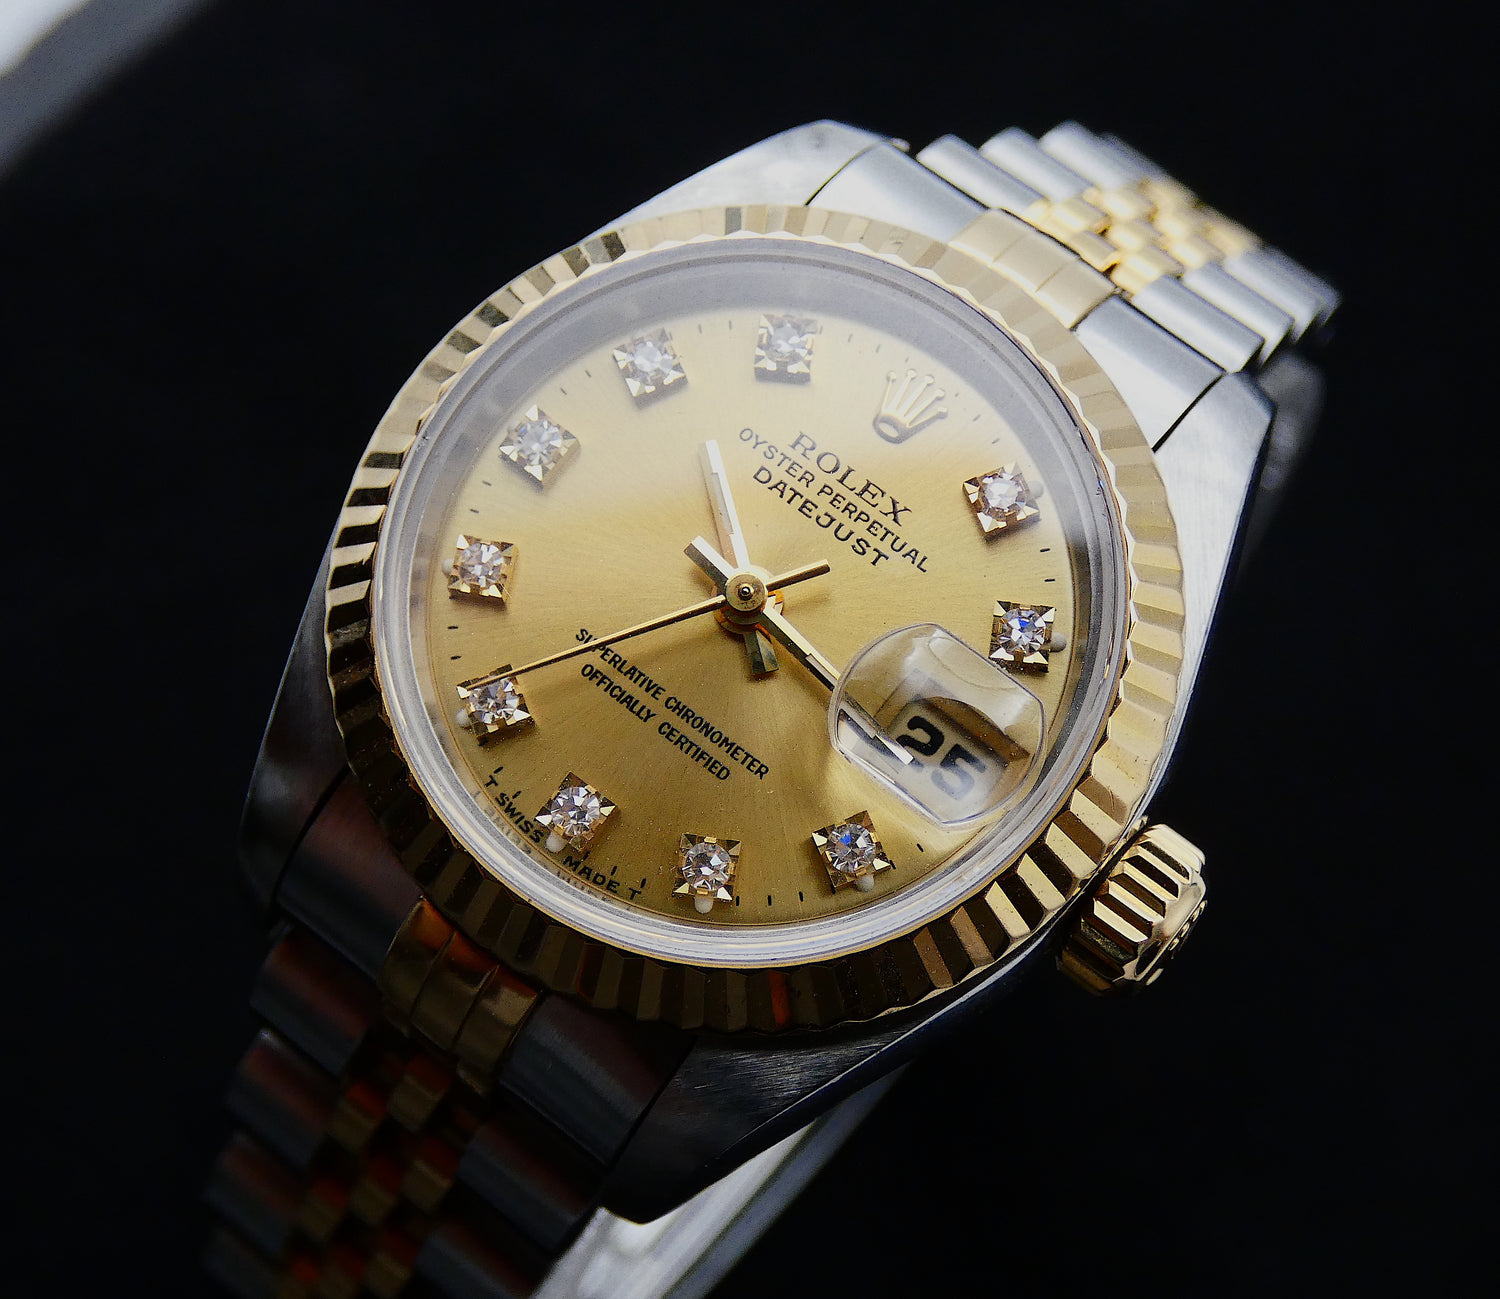 RES Rolex Lady-Datejust 1993 / nice condition 69173